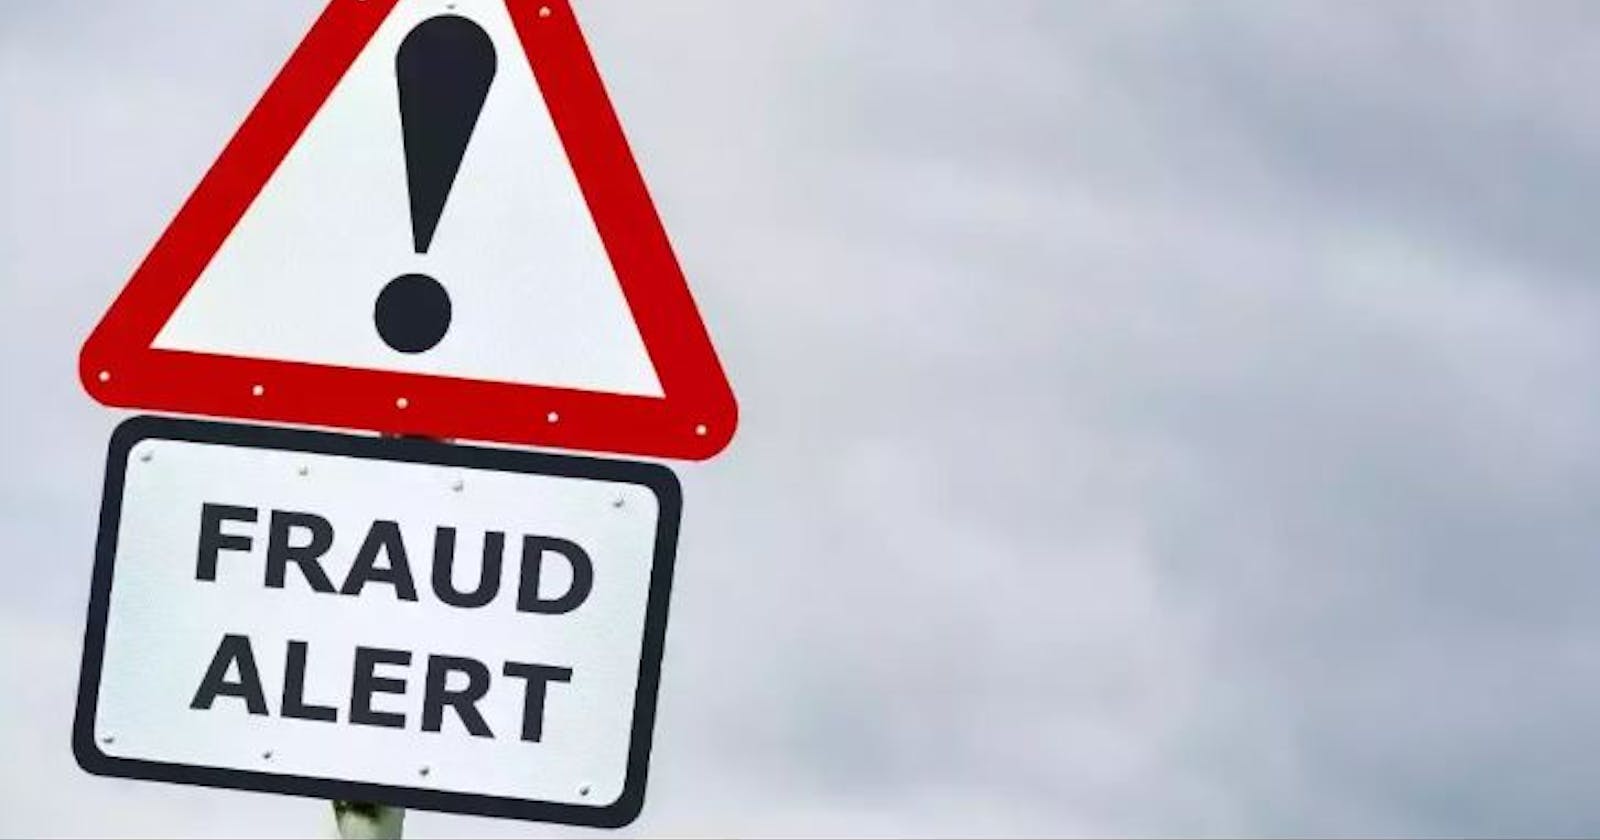 Your Monies And Investment Claims Might Just Get Swooped Away. Beware Of Share Frauds